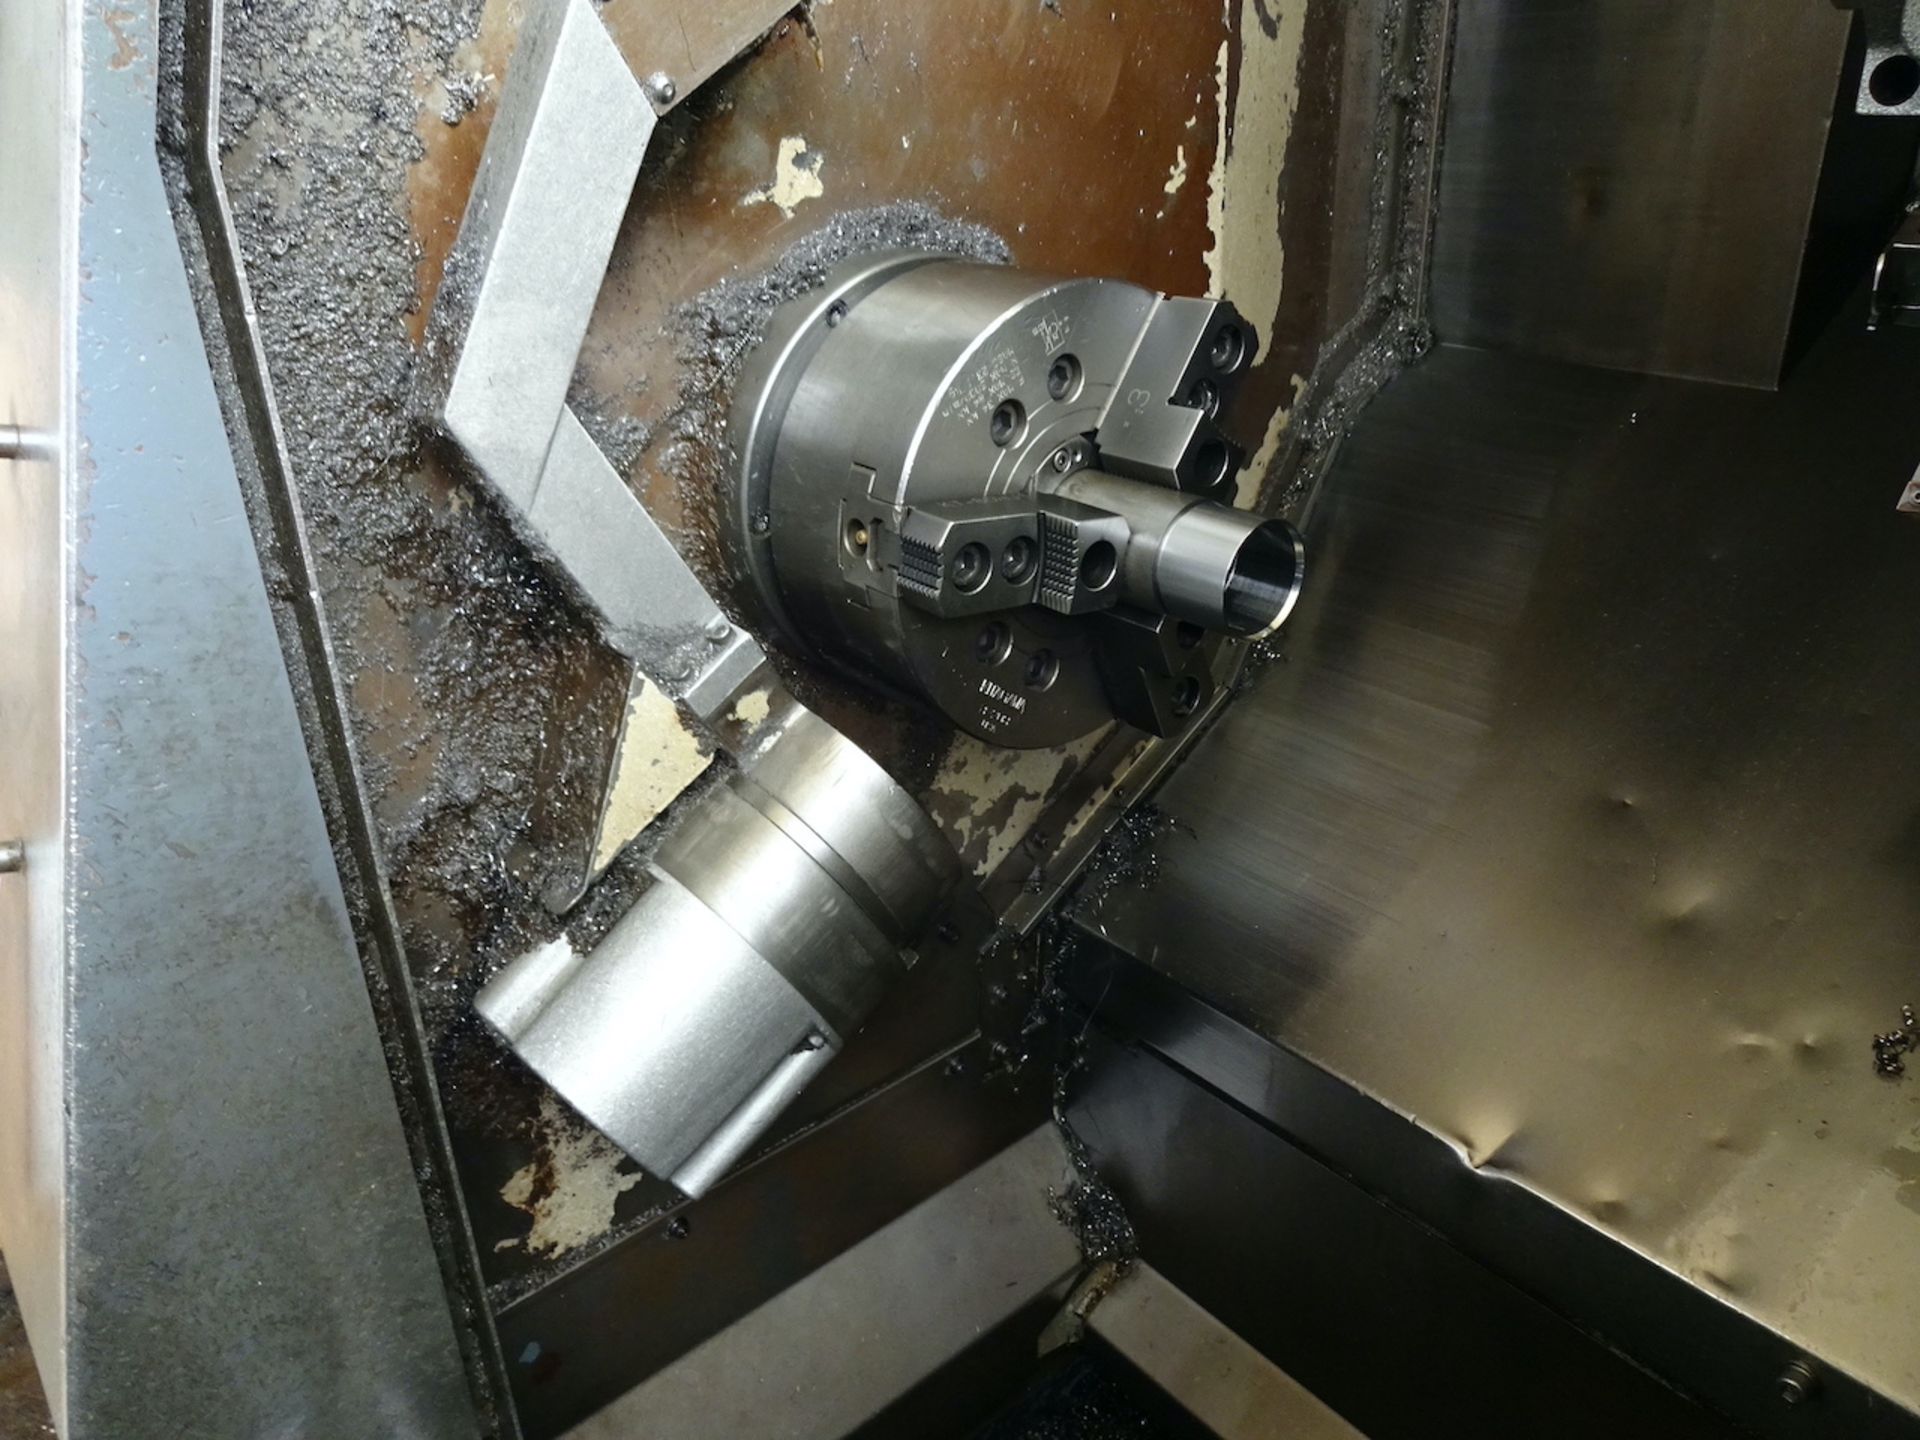 Mazak Model QT-250 Universal CNC Turning Center, S/N 139445 (1998), 8 in. 3-Jaw Chuck, 12 Station - Image 5 of 9